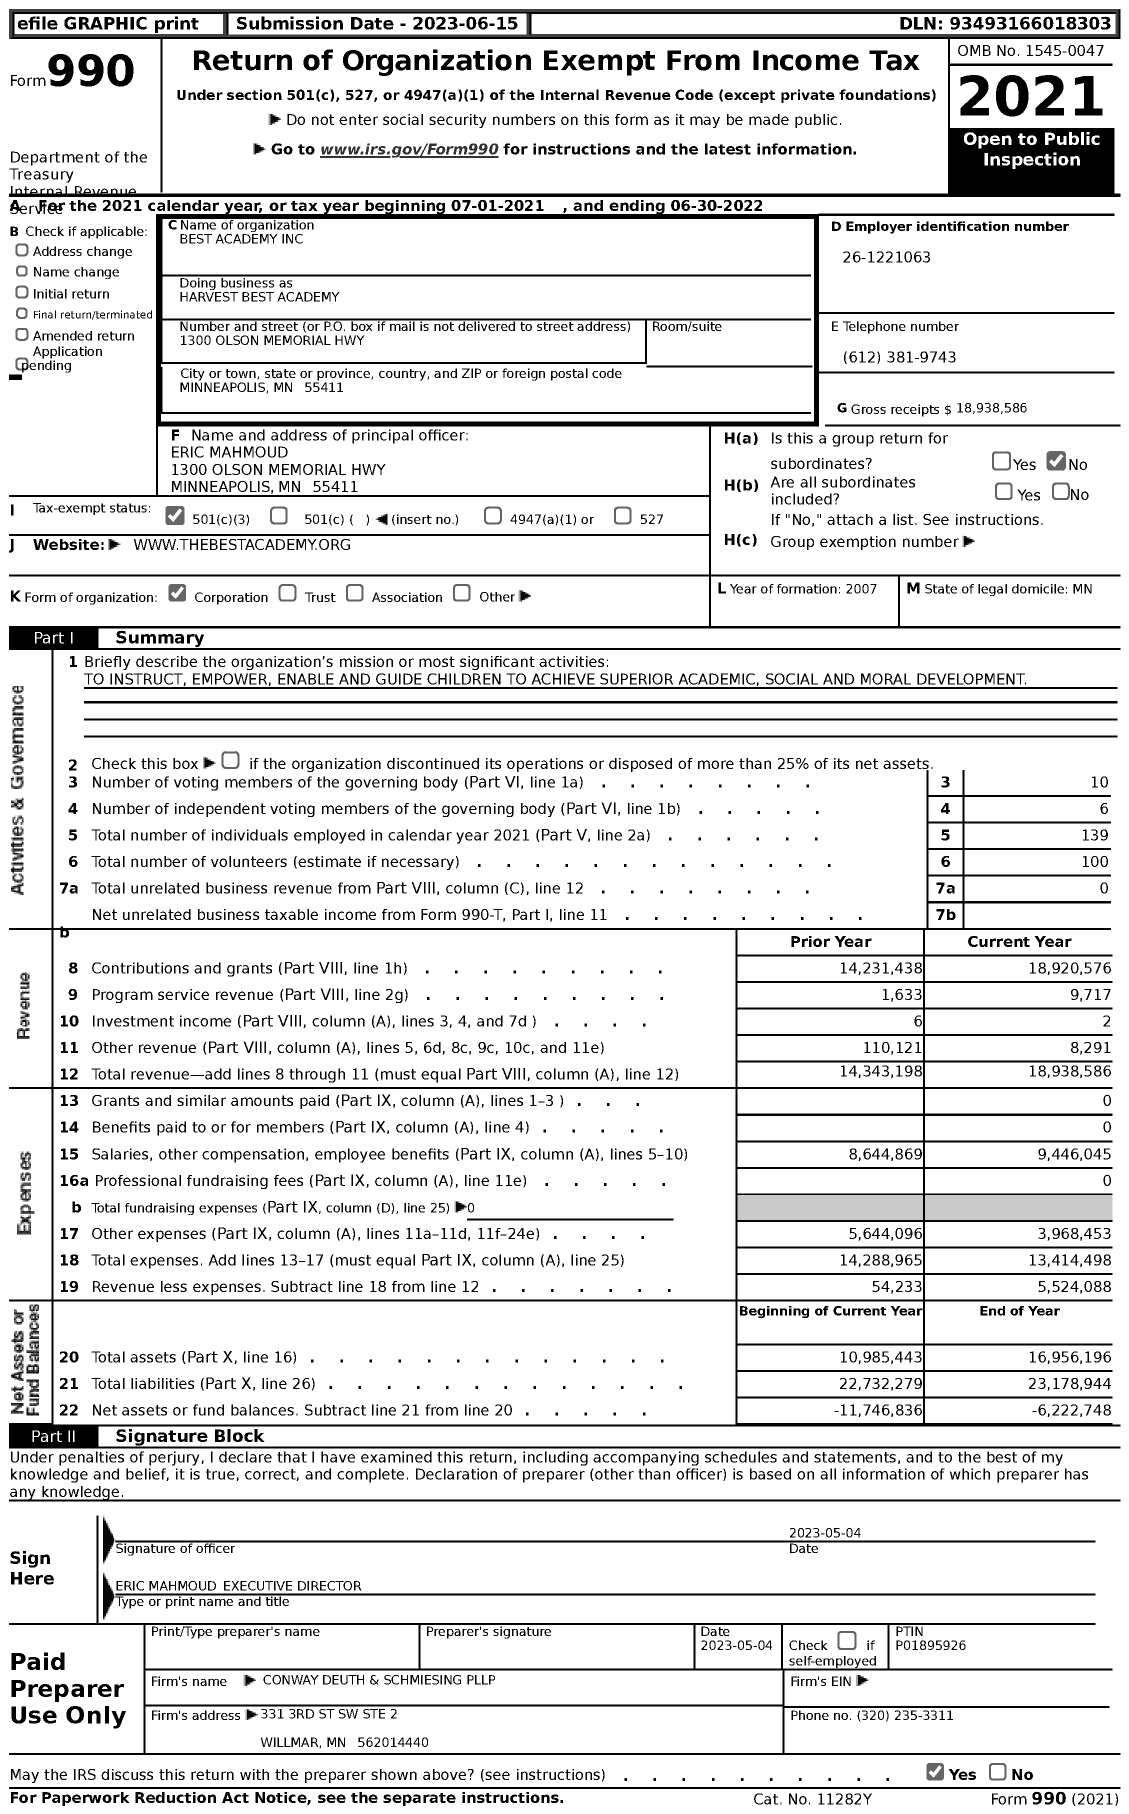 Image of first page of 2021 Form 990 for Harvest Best Academy